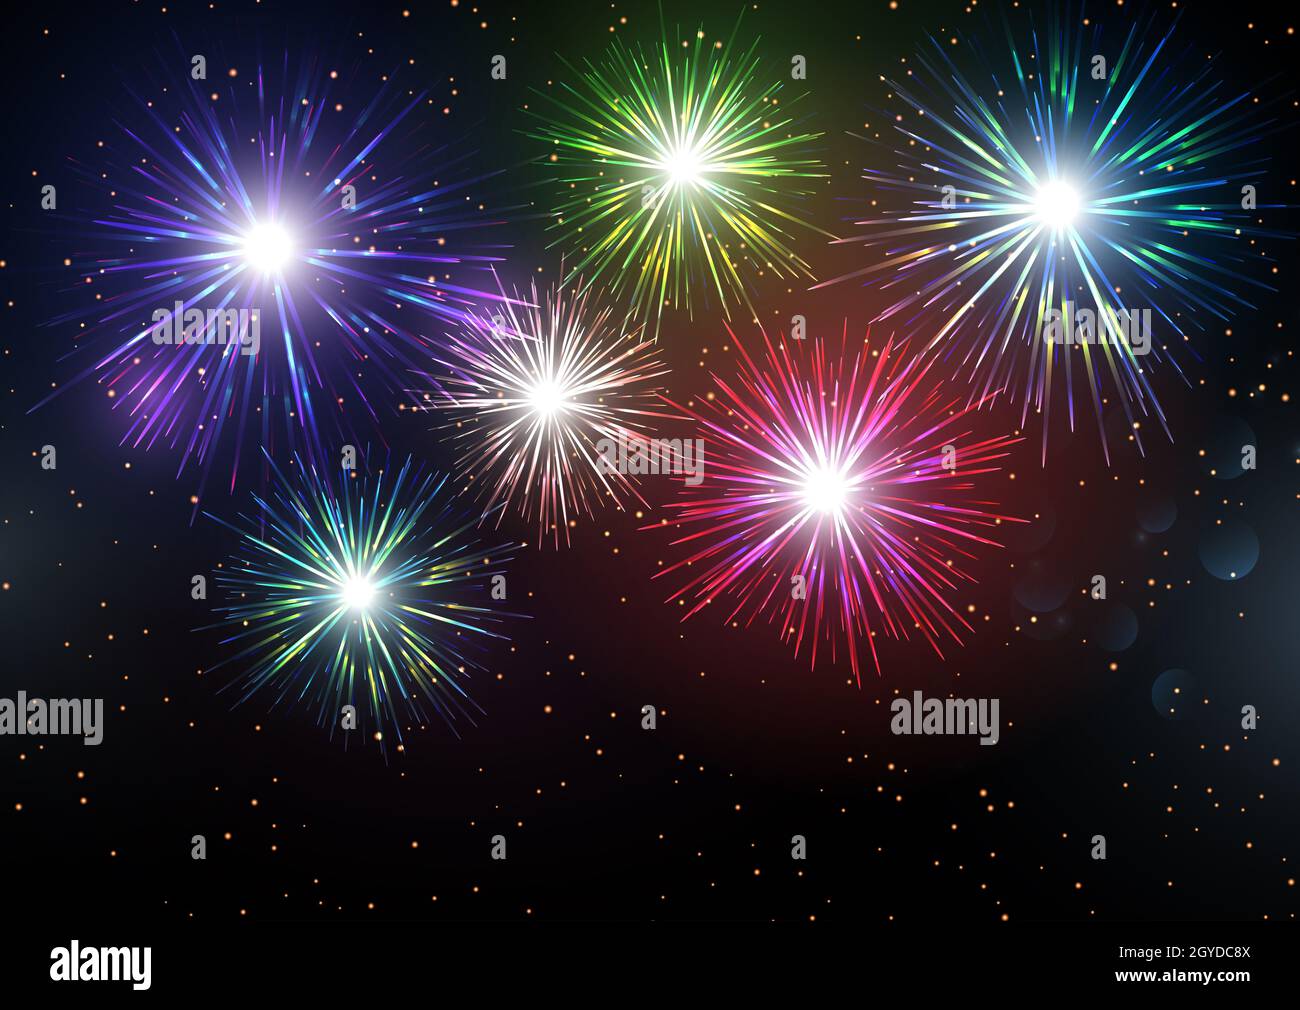 Celebration background with colourful fireworks display Stock Photo